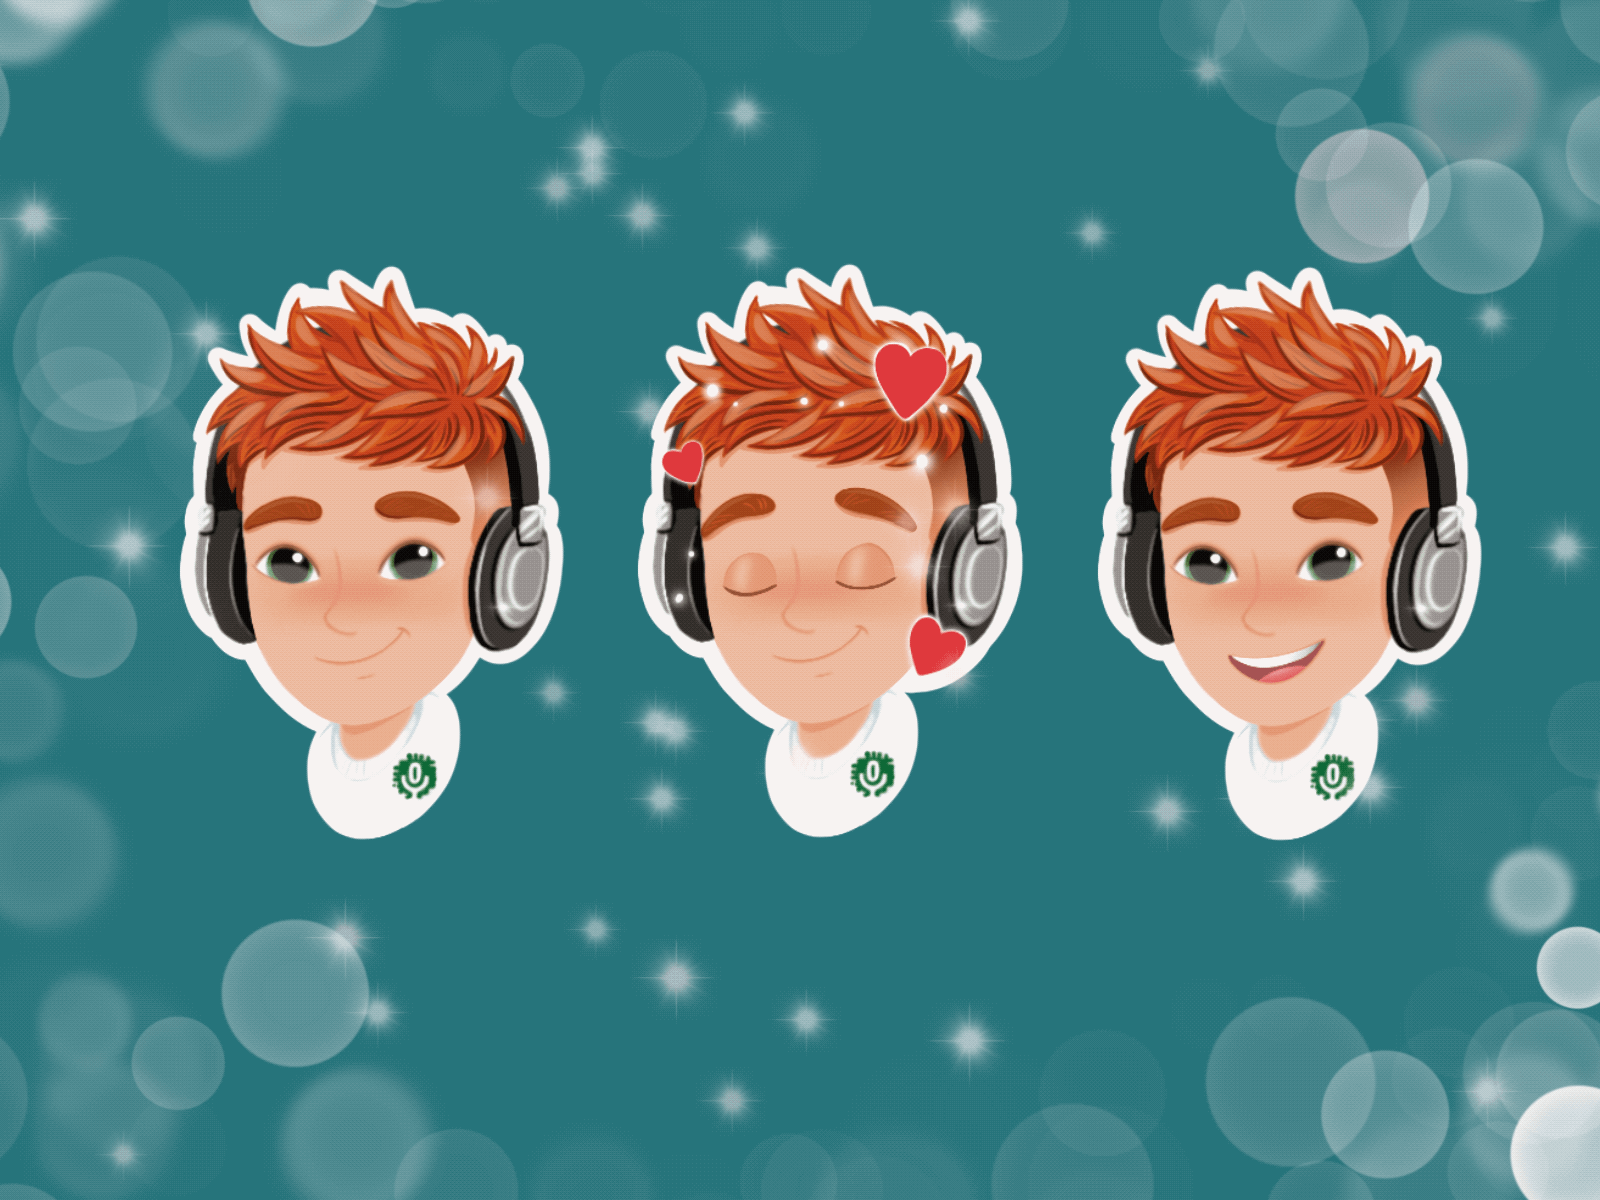 Boy with the headphones stickers